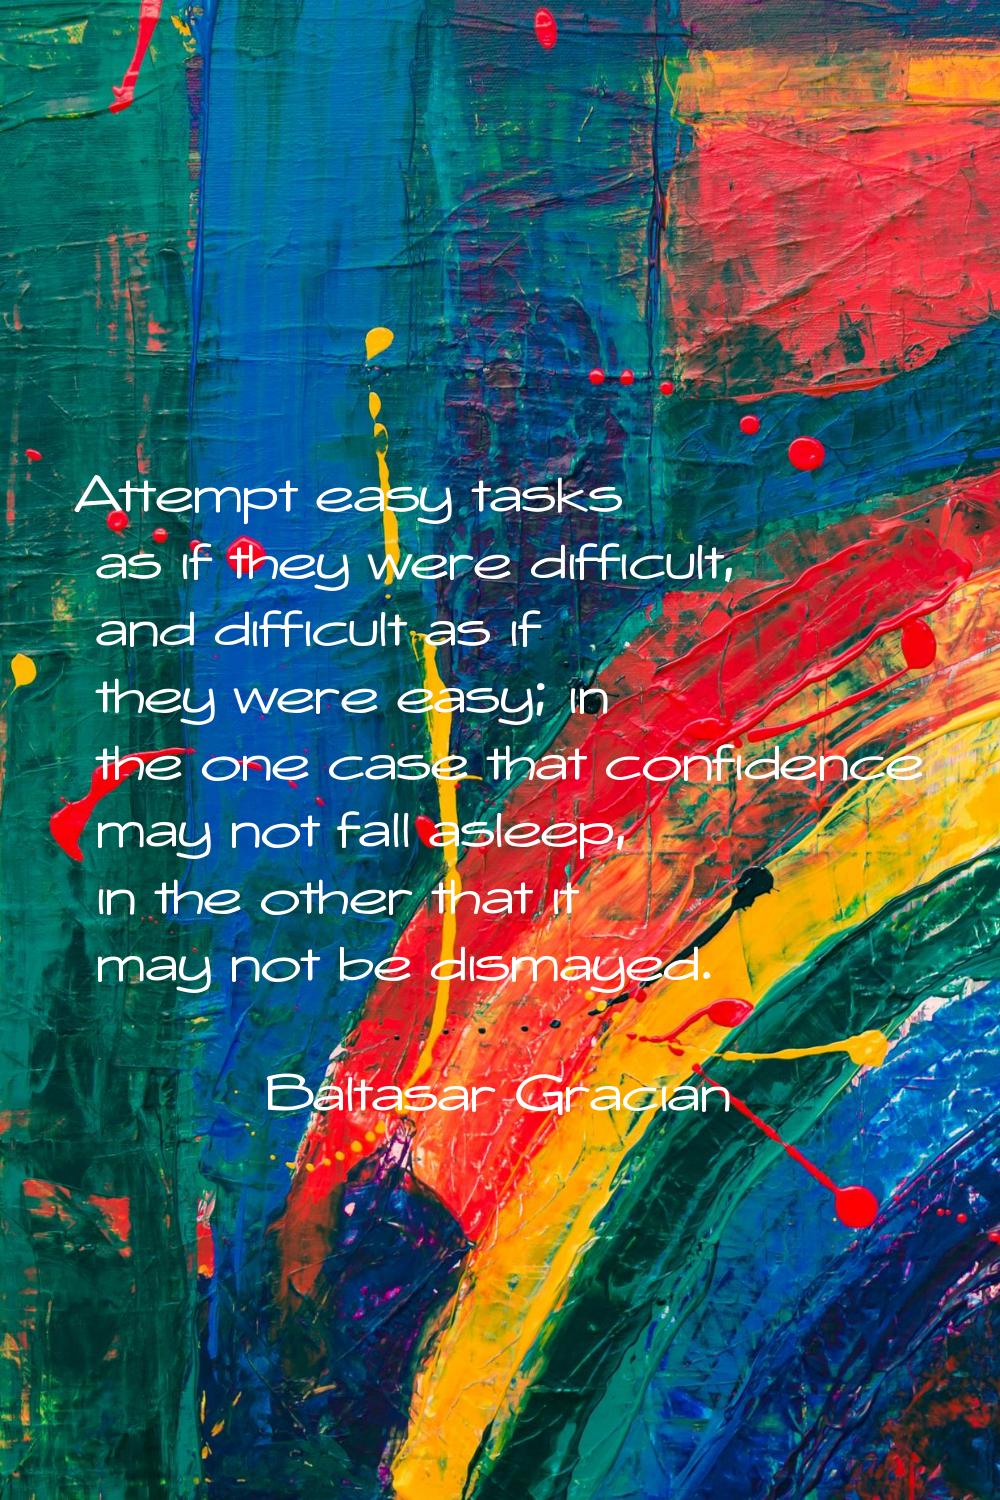 Attempt easy tasks as if they were difficult, and difficult as if they were easy; in the one case t